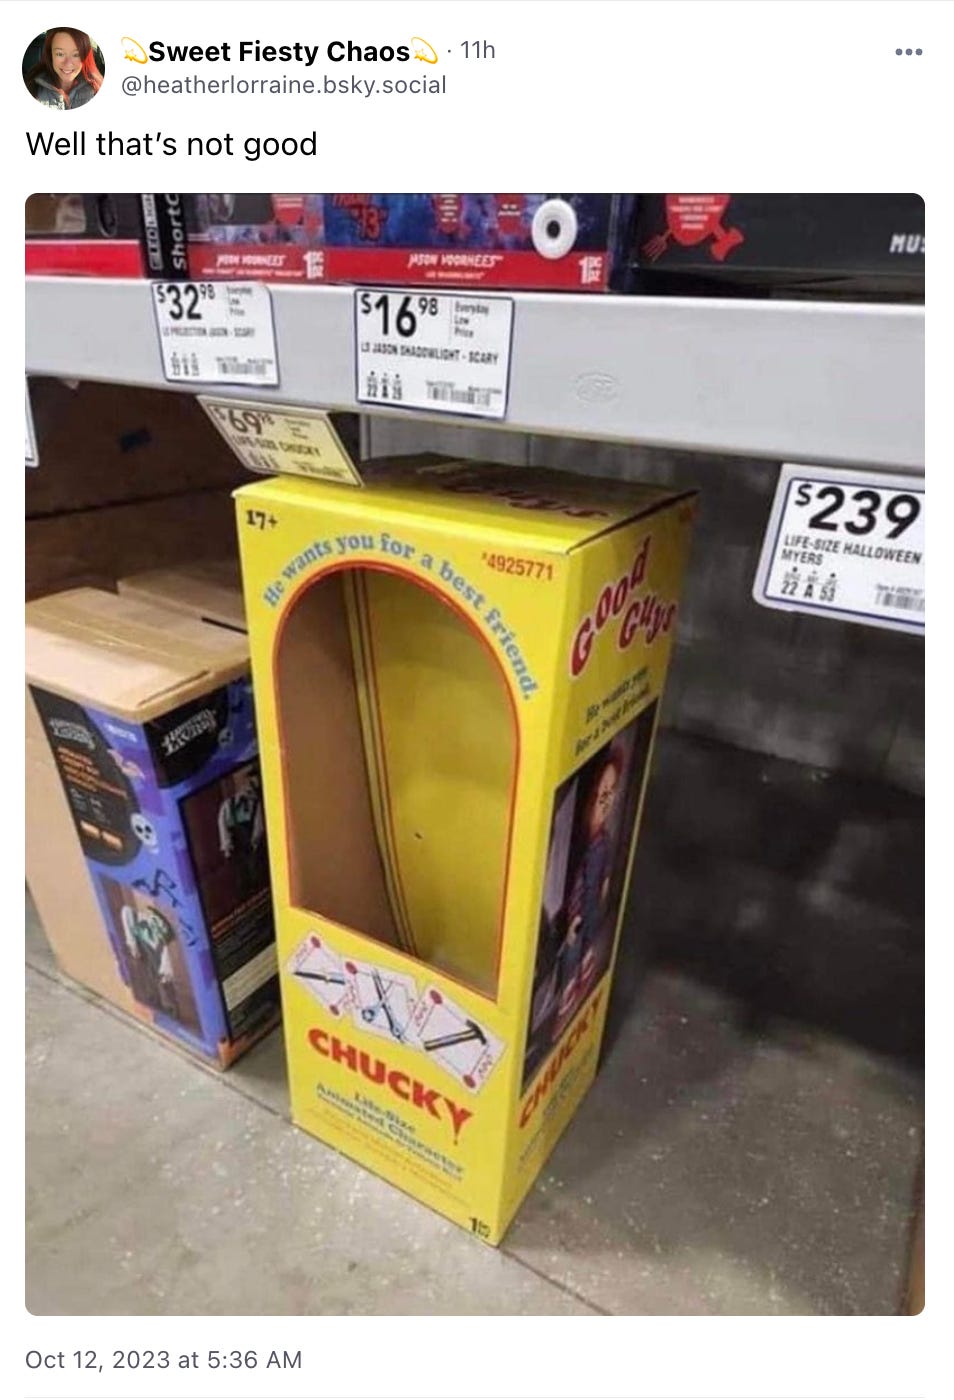 Bluesky user @heatherlorraine.bsky.social sharing a photo of an empty Chucky doll box in a department store captioned “Well that’s not good”